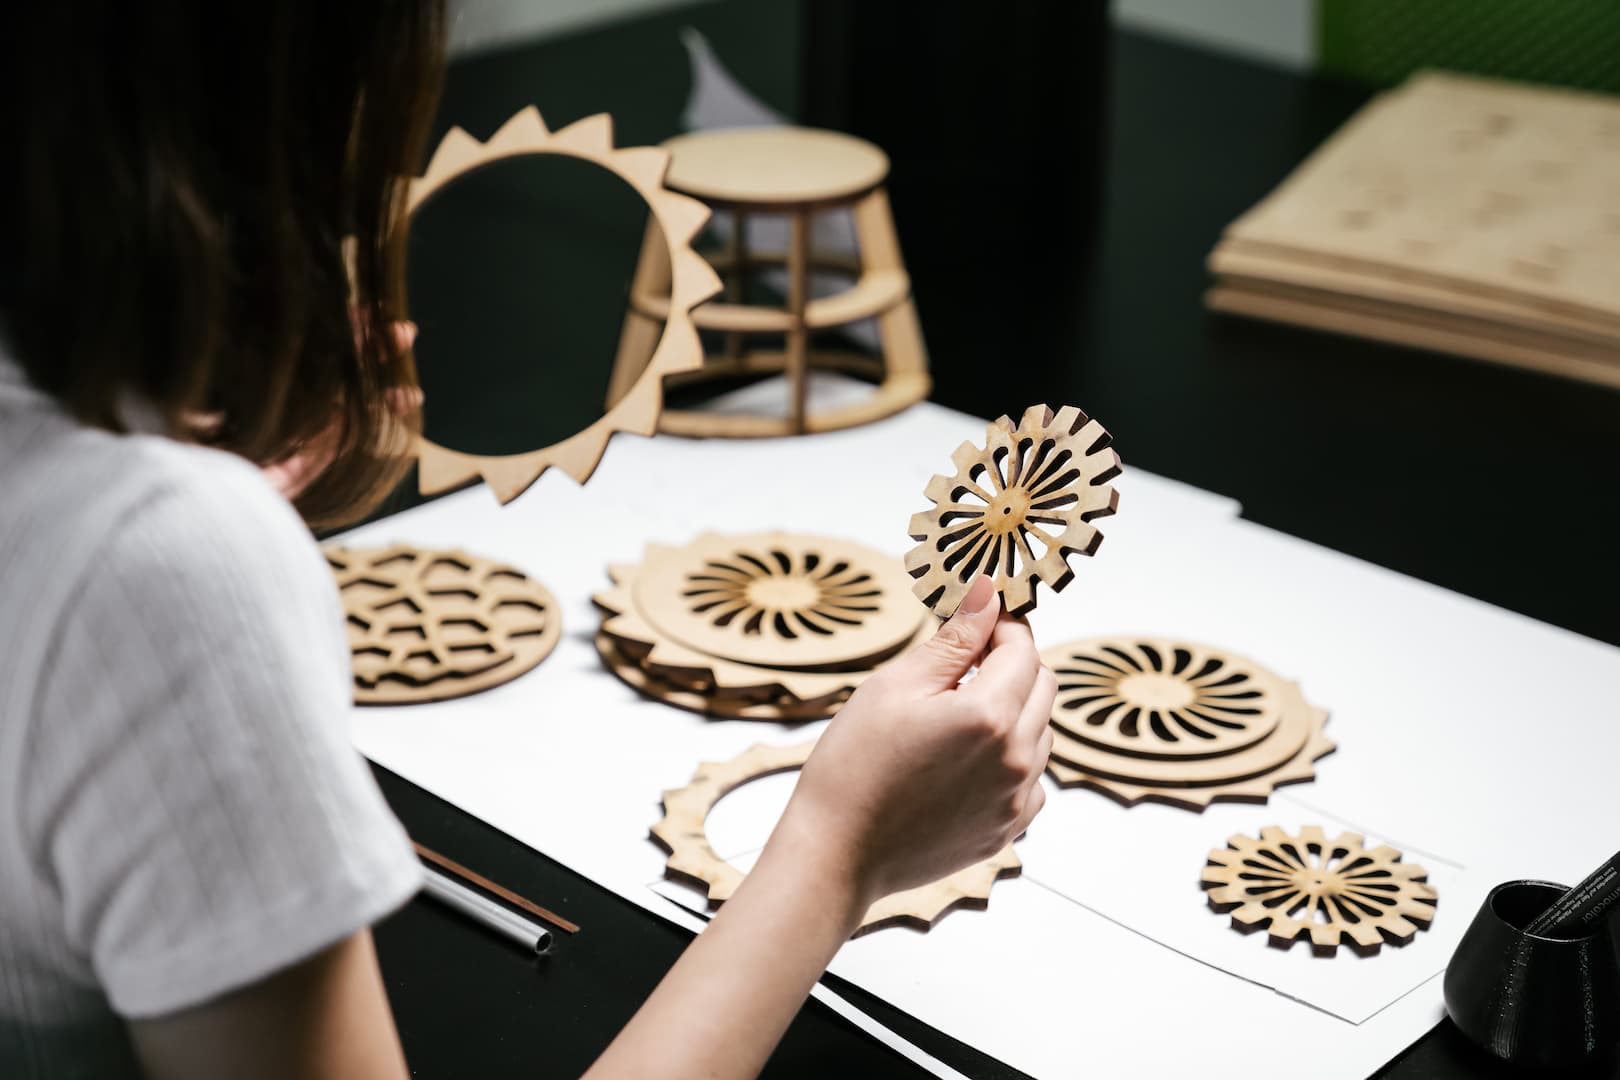 Student examining wooden cogs and wheels